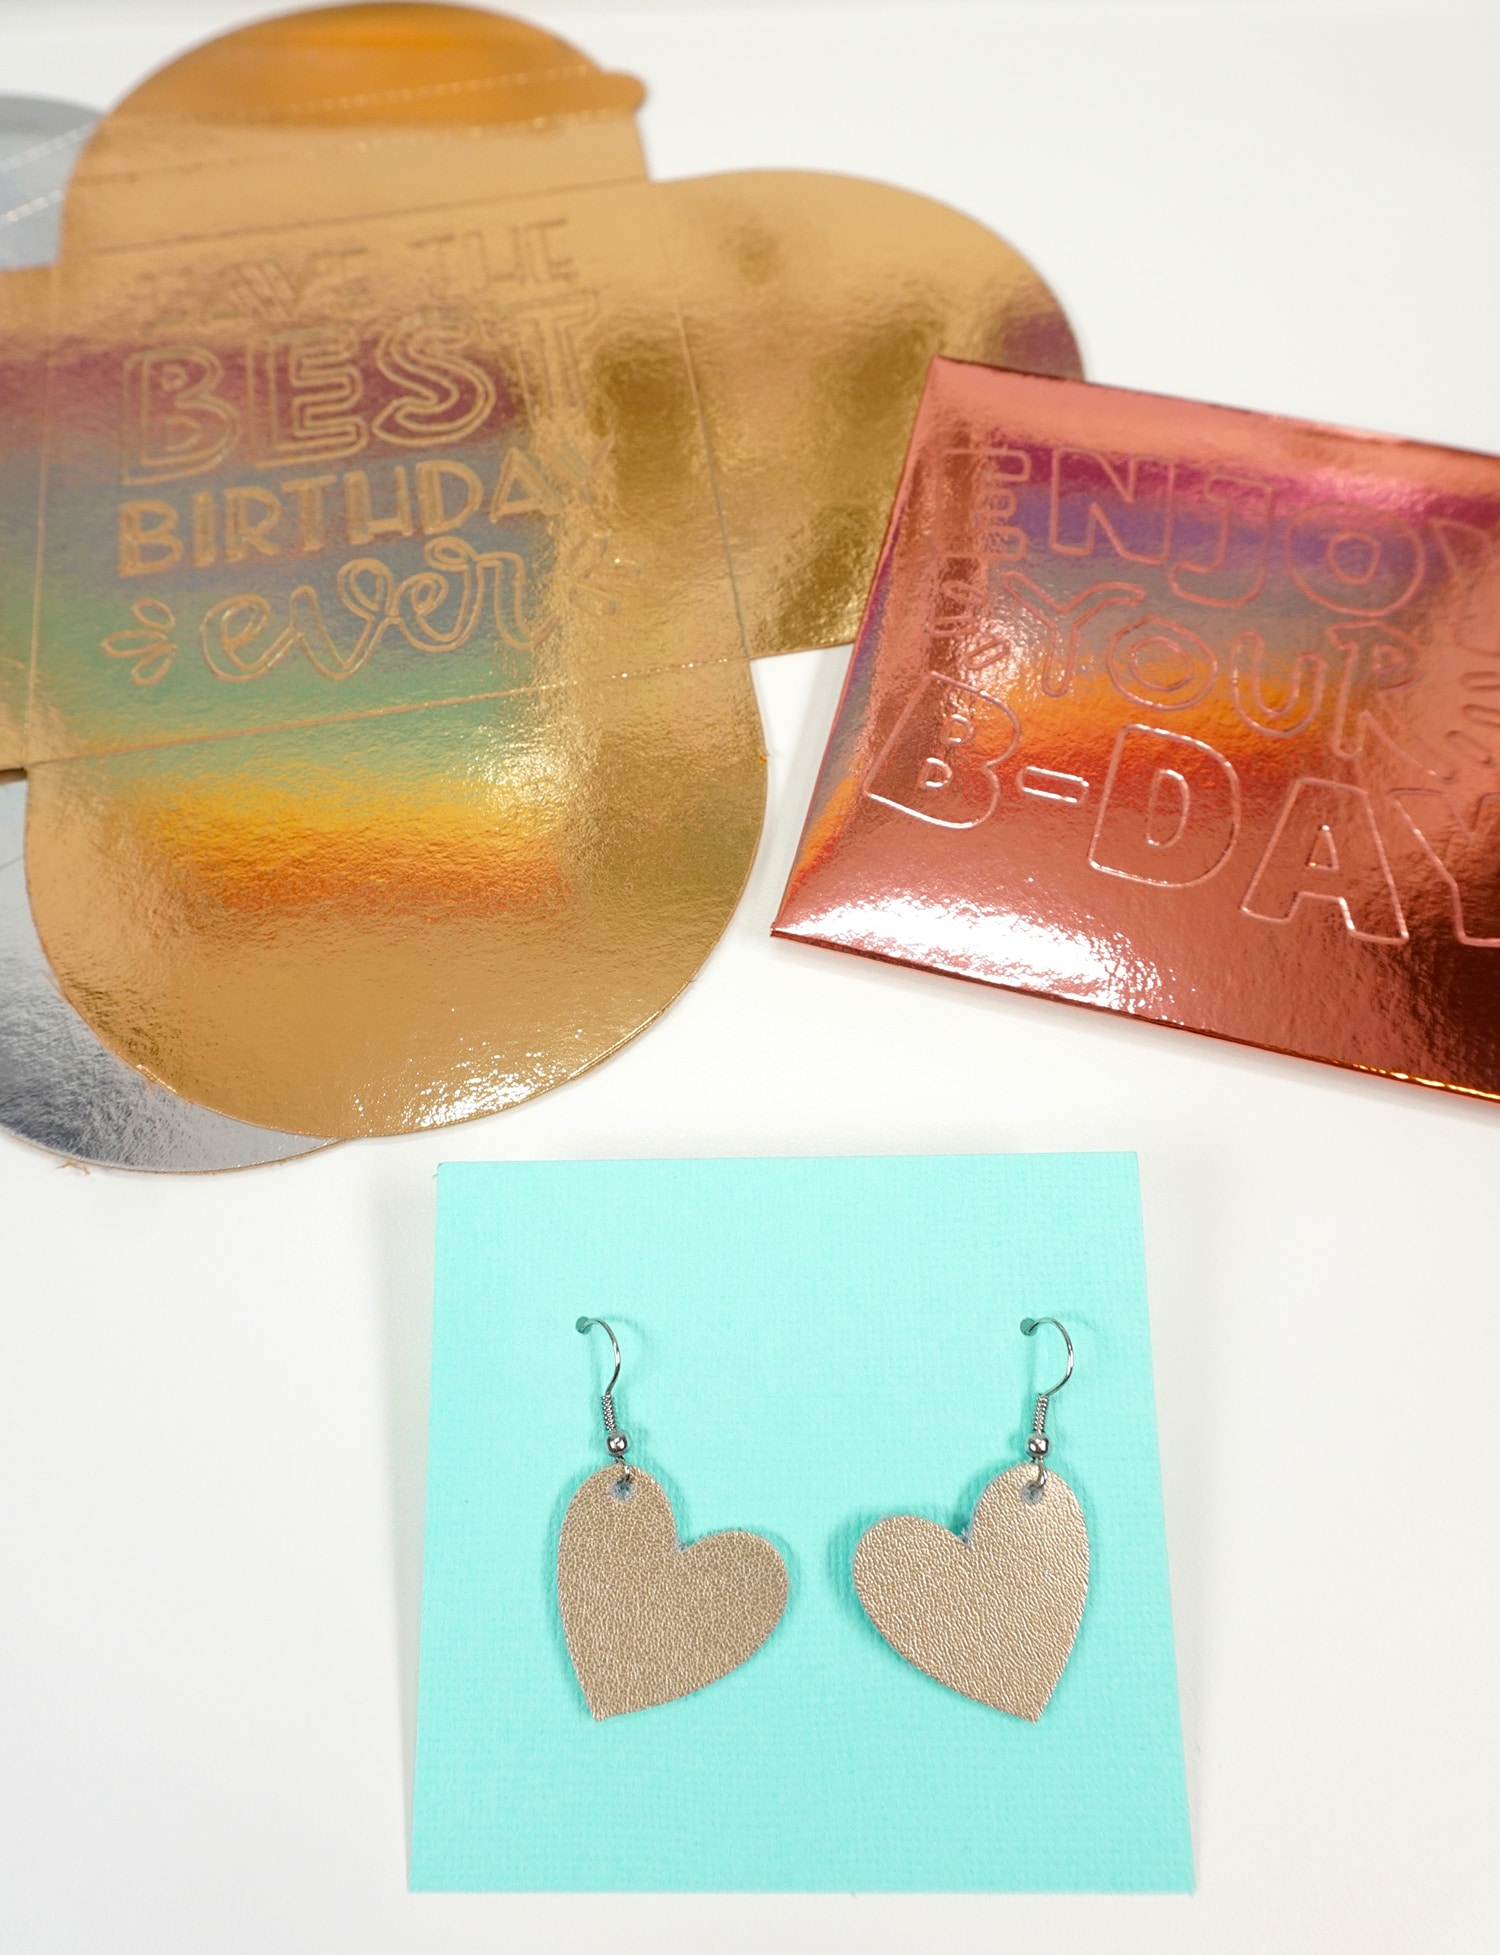 leather heart earrings made with cricut and gift card holders